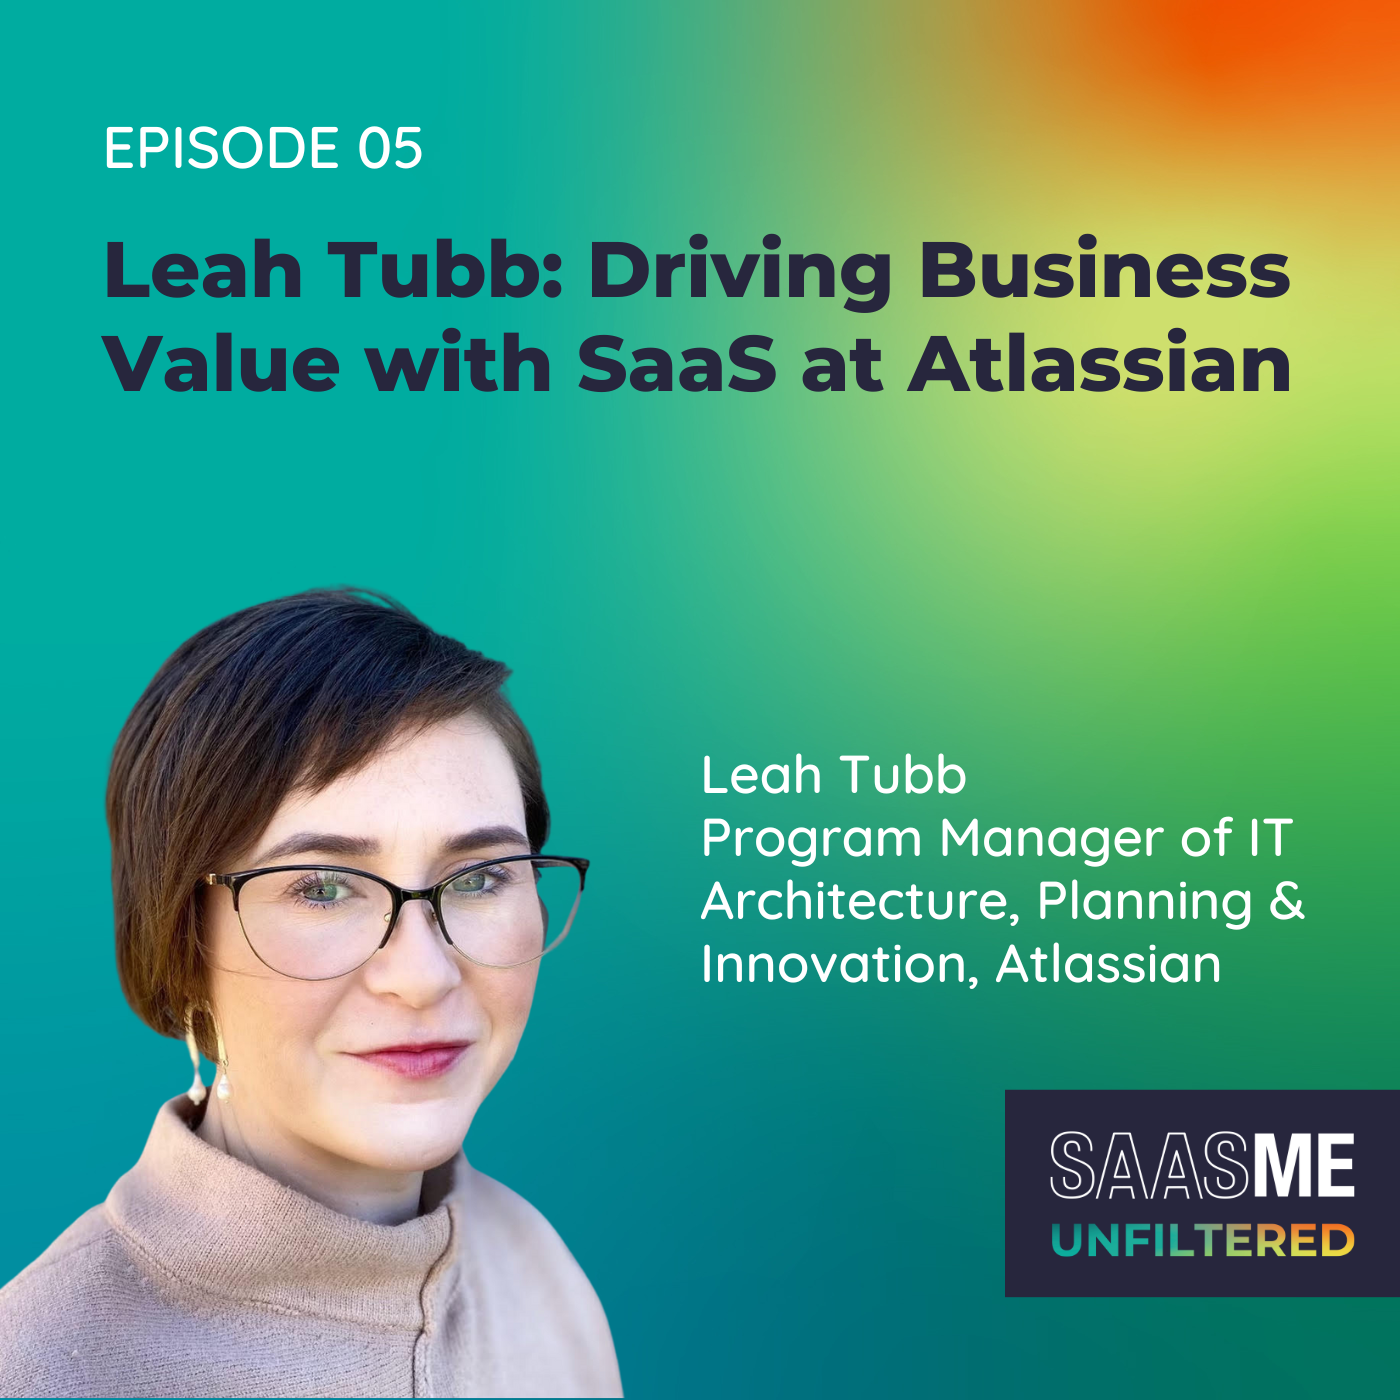 Leah Tubb: Driving Business Value with SaaS at Atlassian